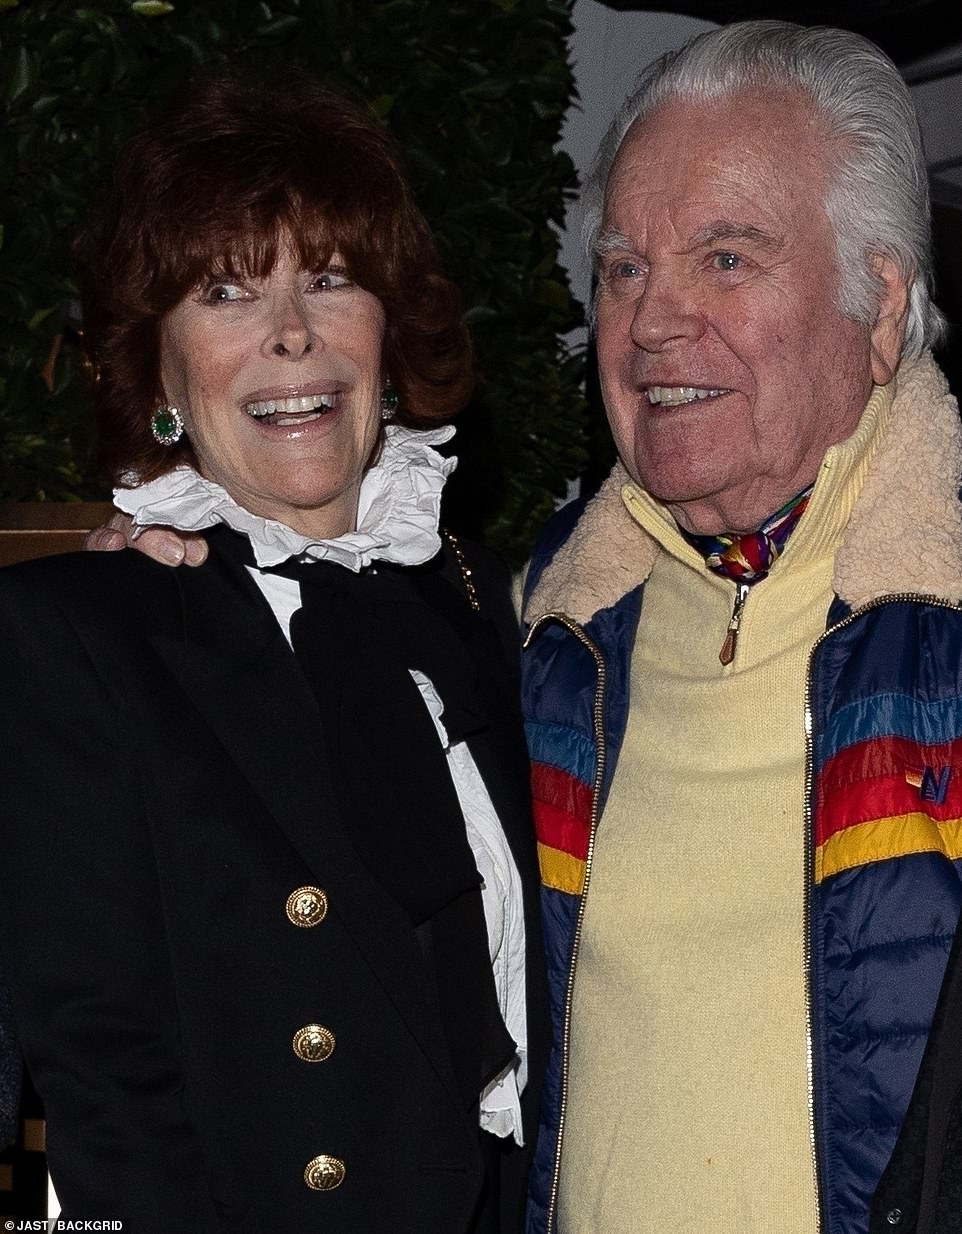 Robert Wagner was spotted on a rare public outing while celebrating his 94th birthday on Saturday with his wife Jill St. John, 83, and friends.